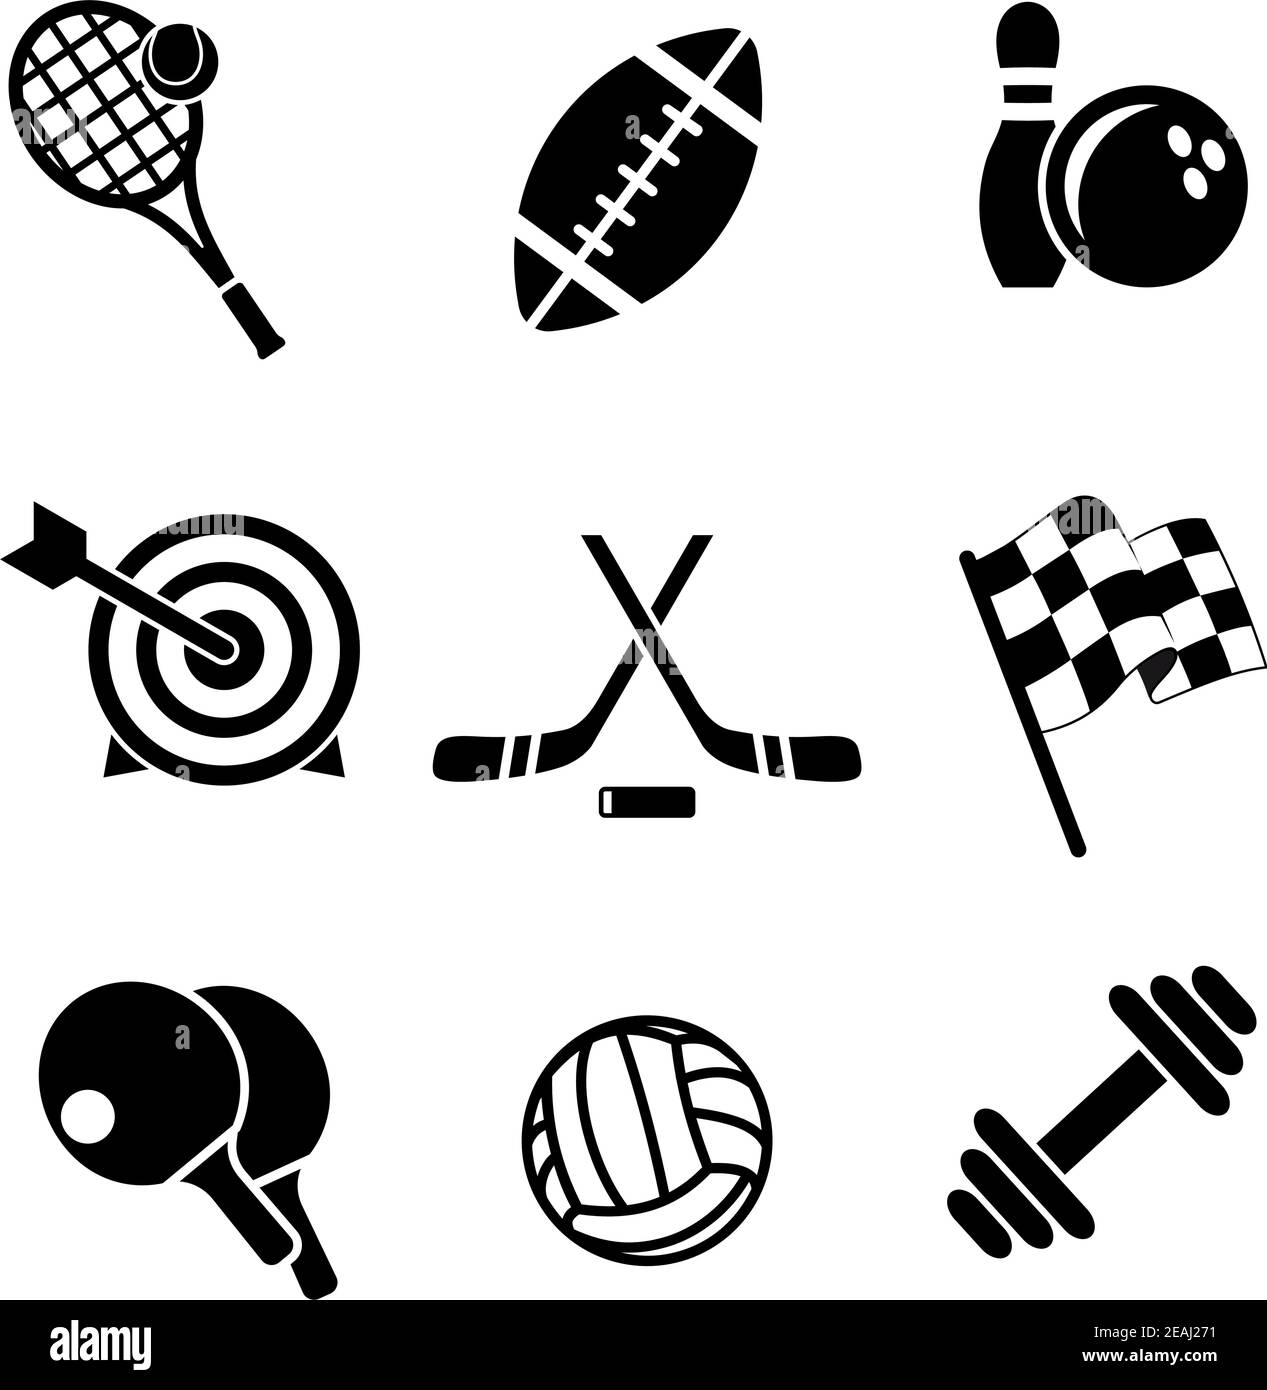 Black and white sporting icons depicting tennis, football, bowls, archery, hockey, motor racing, weight lifting, table tennis,rugby and volleyball Stock Vector